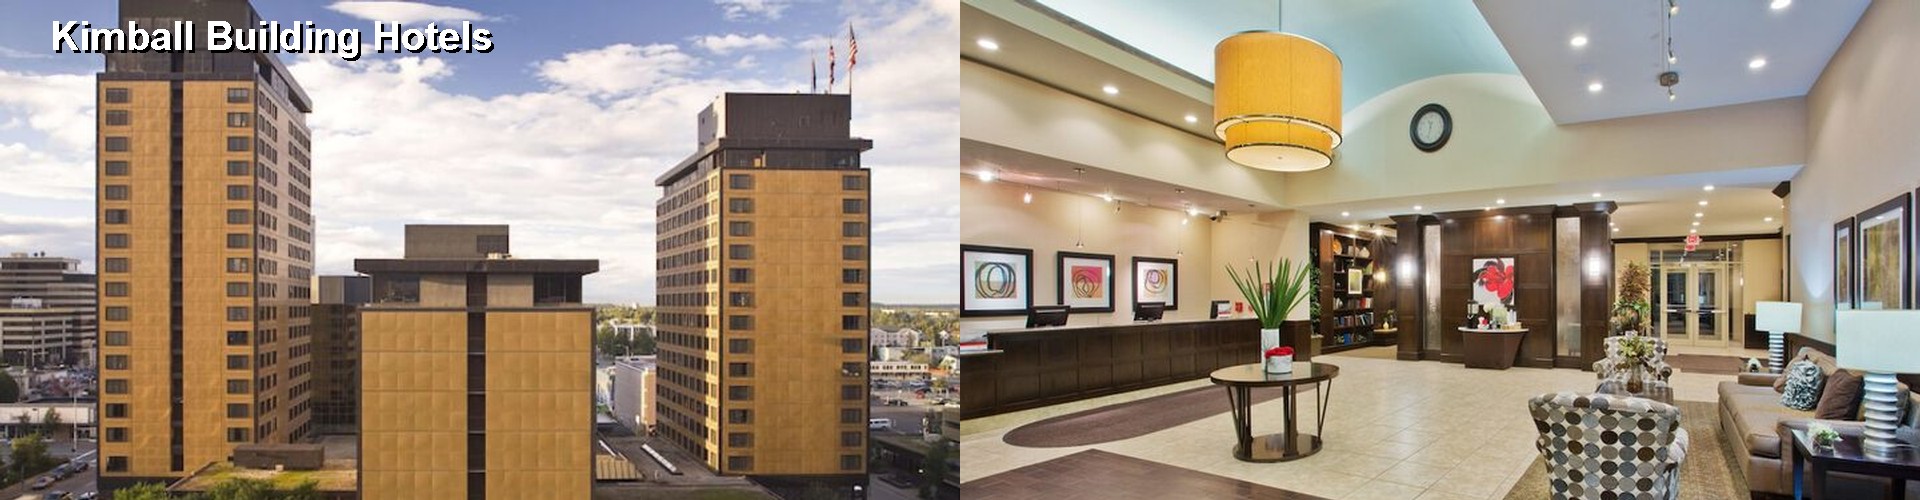 5 Best Hotels near Kimball Building